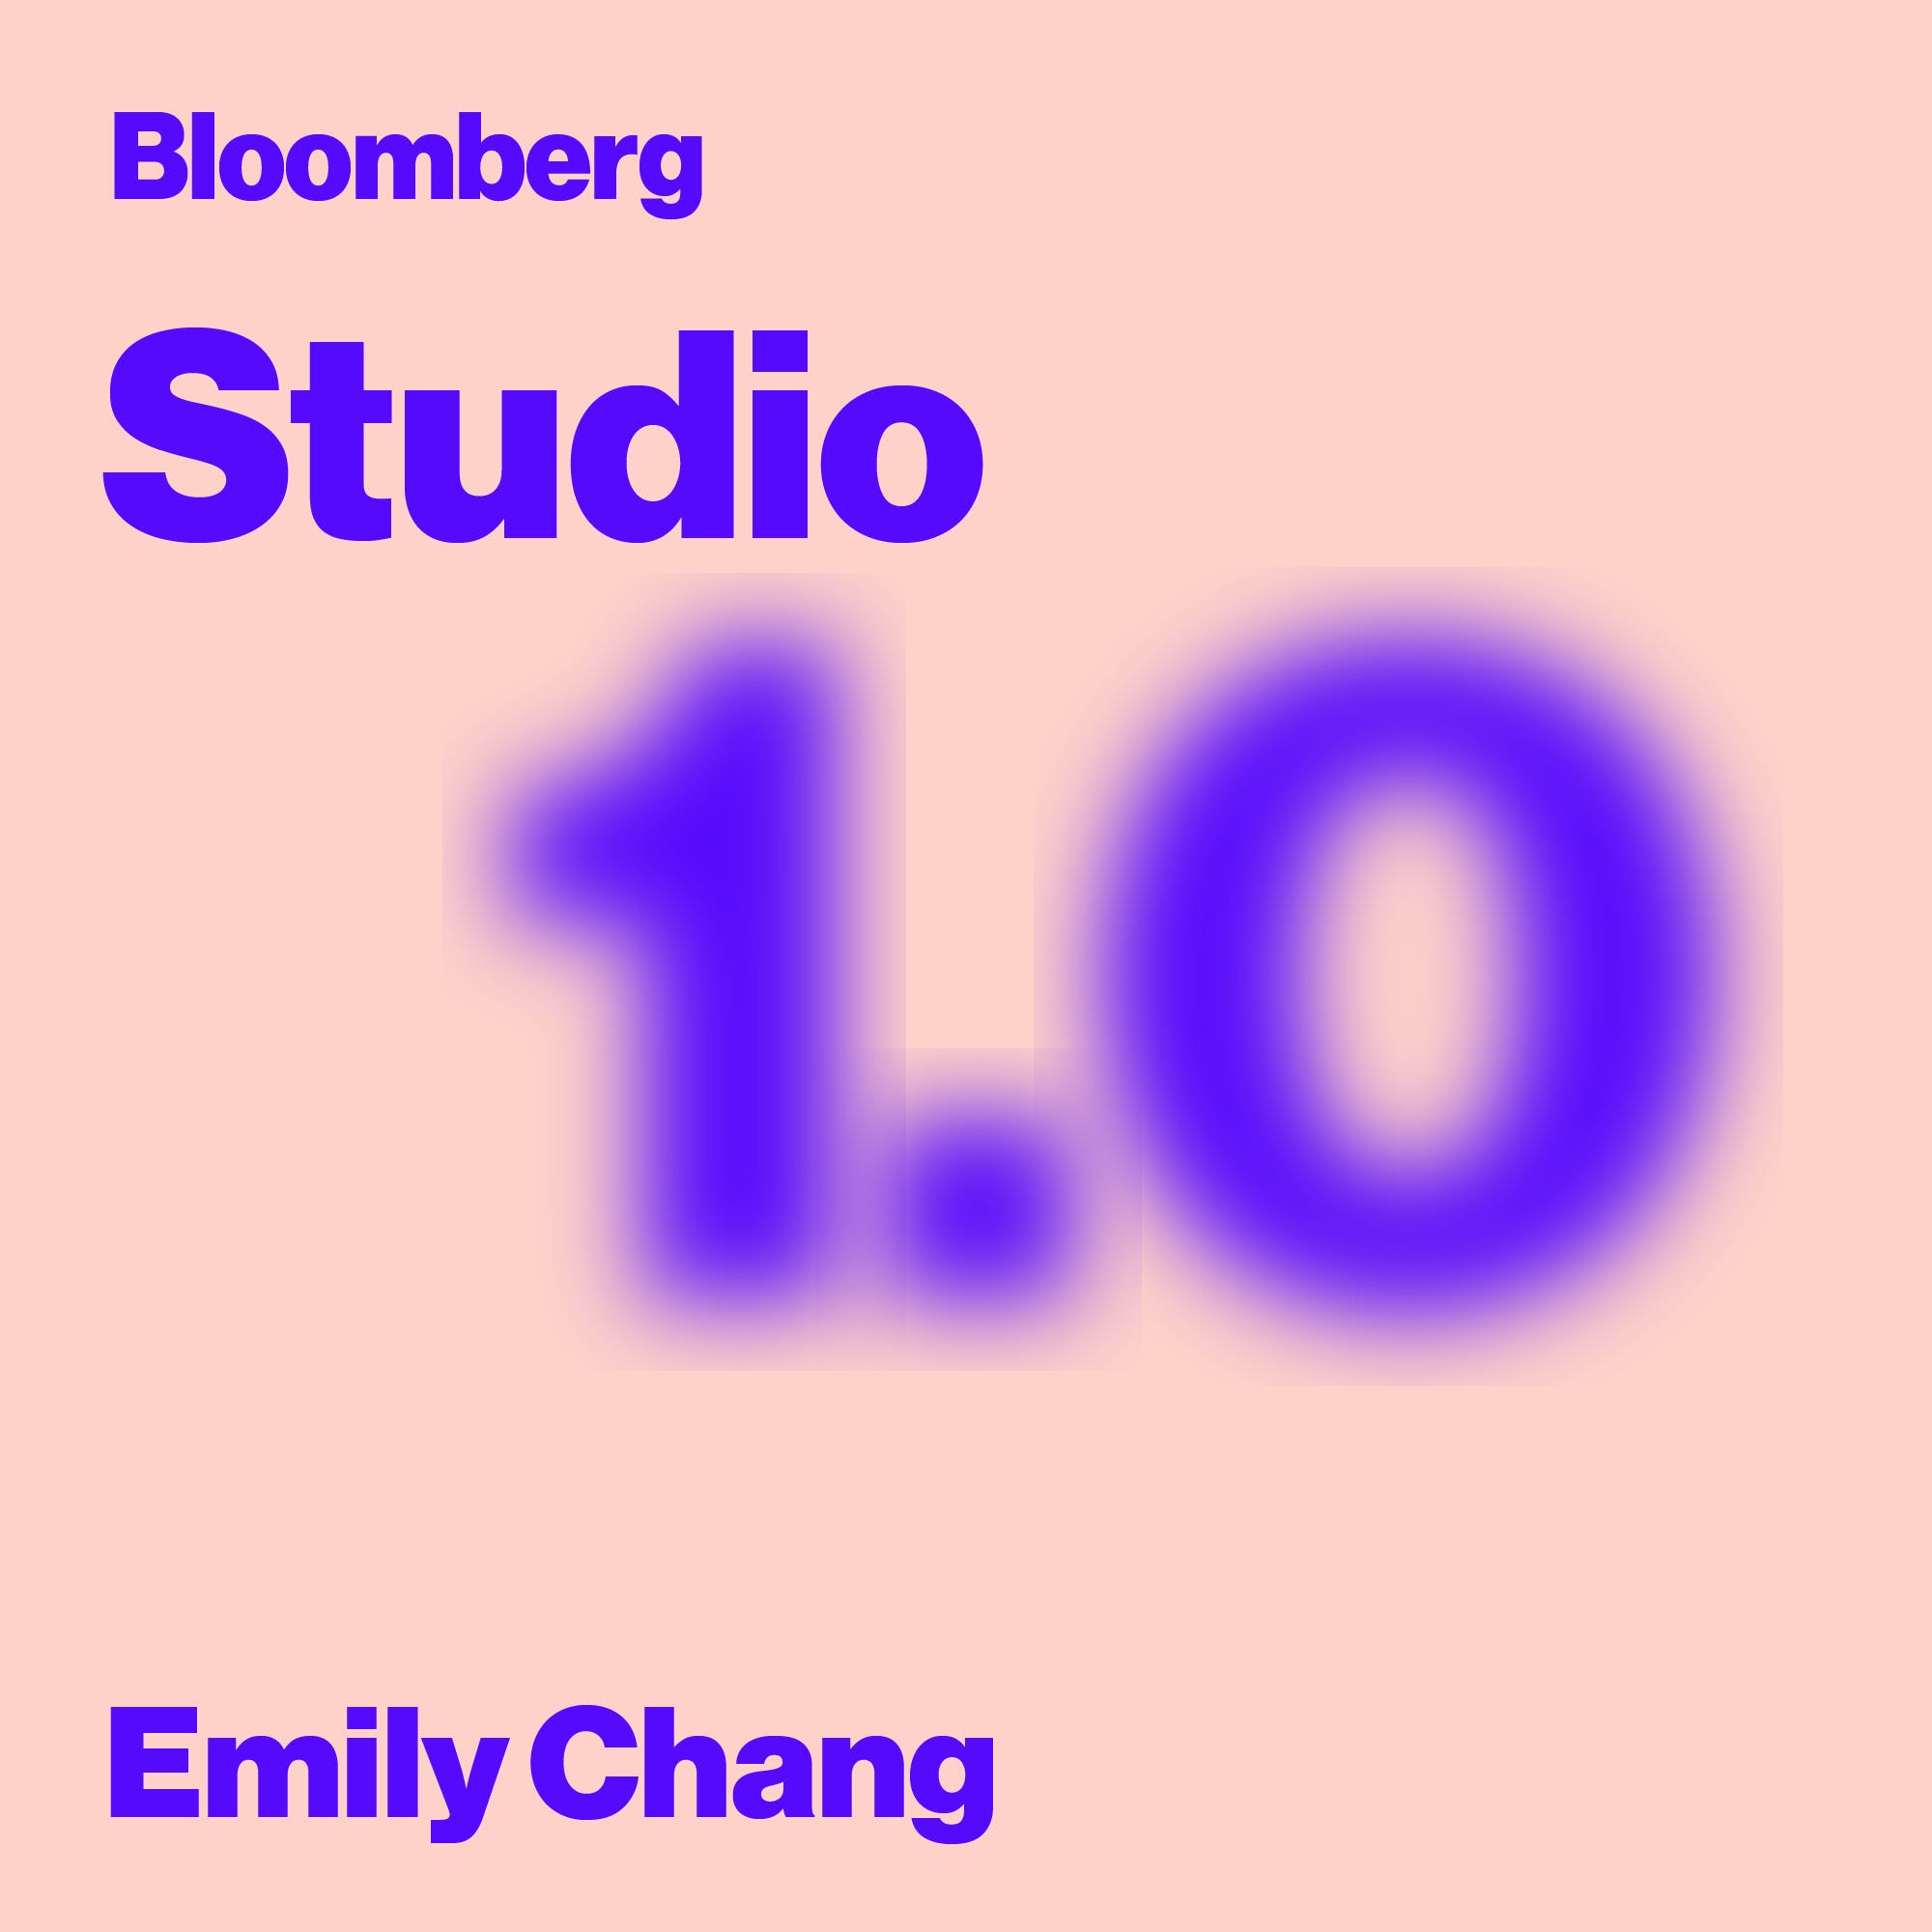 Studio 1.0 - New media and the making of Silicon Valley